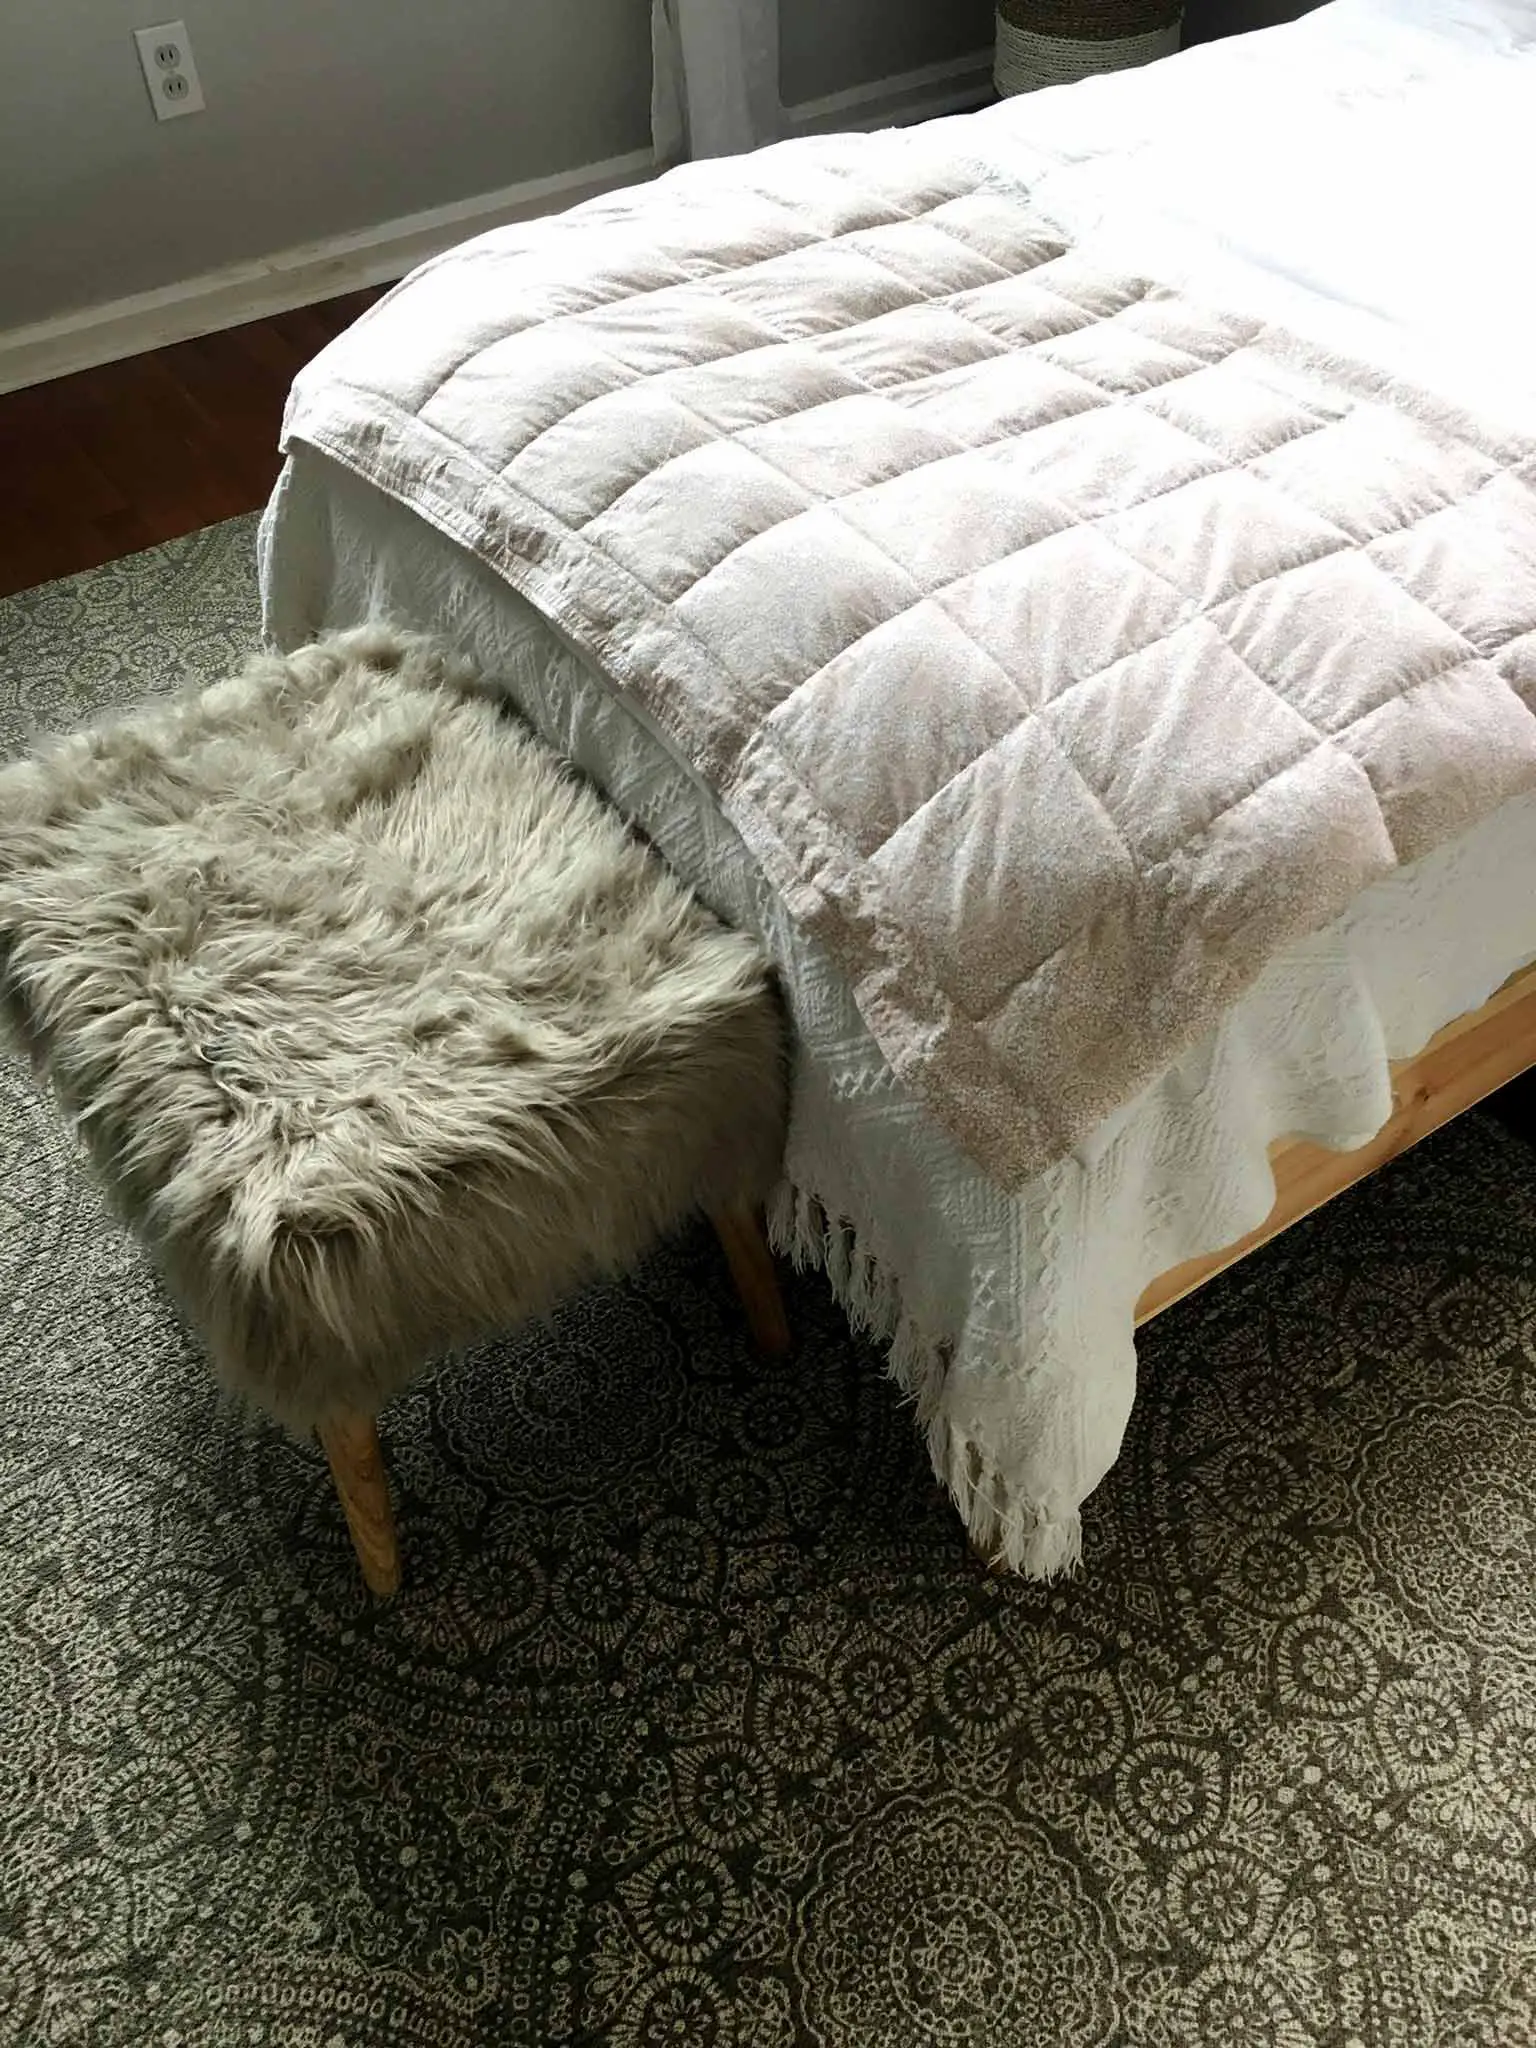 Patterned cotton rug with faux fur stool - modern boho tween bedroom - That Homebird Life Blog